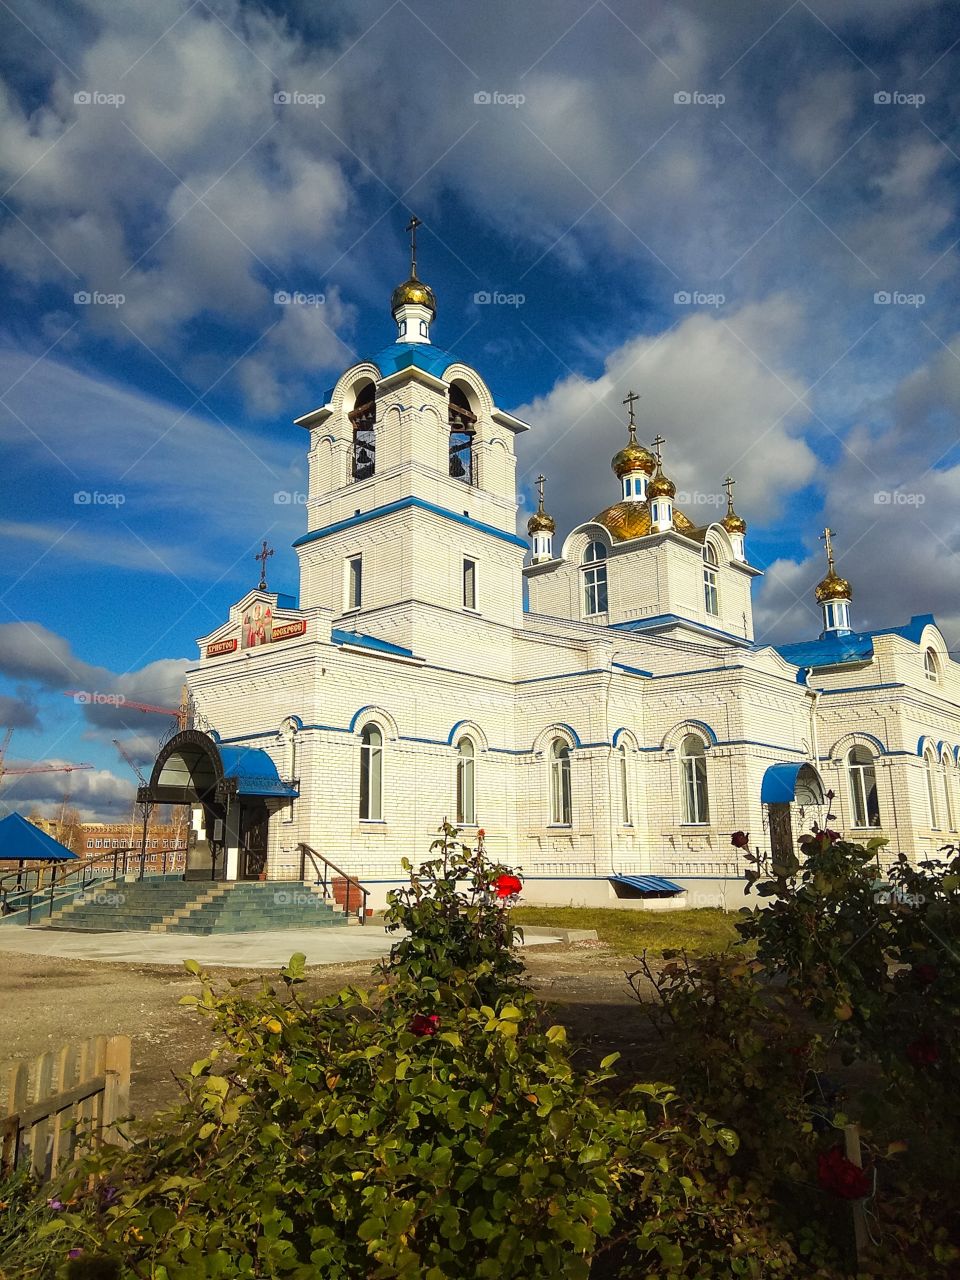 View of St. Nicholas Church (Russia, Ulyanovsk) under a very beautiful cloudy sky on a sunny autumn day